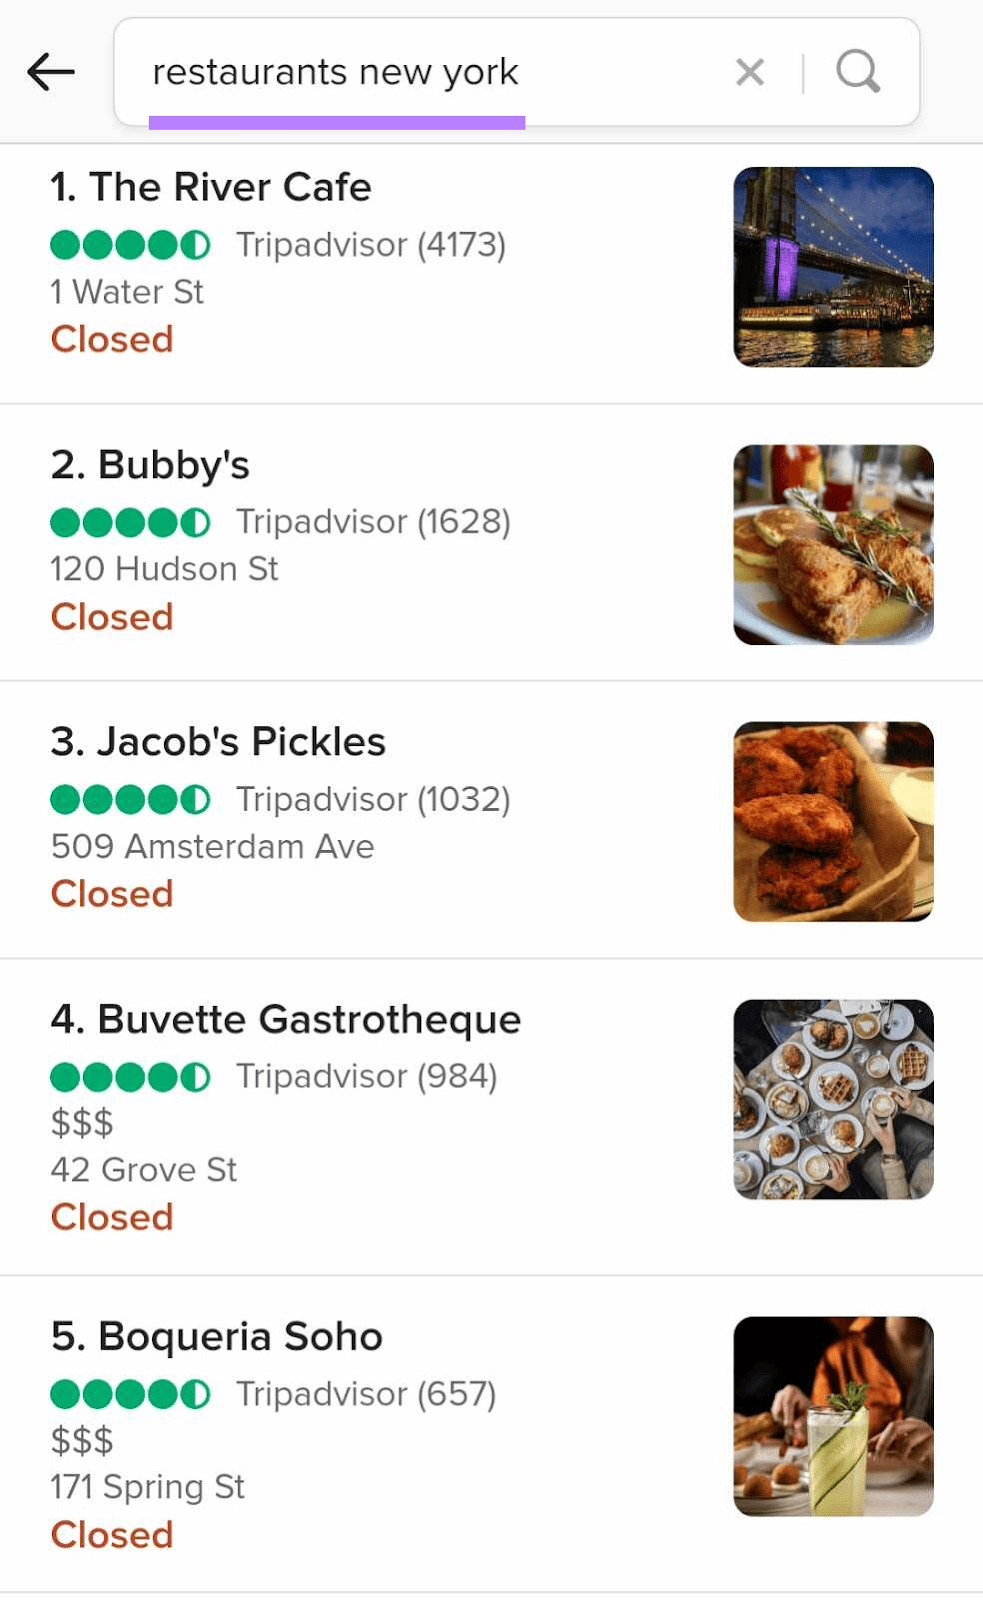 DuckDuckGo's results for "restaurant new york" feature Tripadvisor reviews